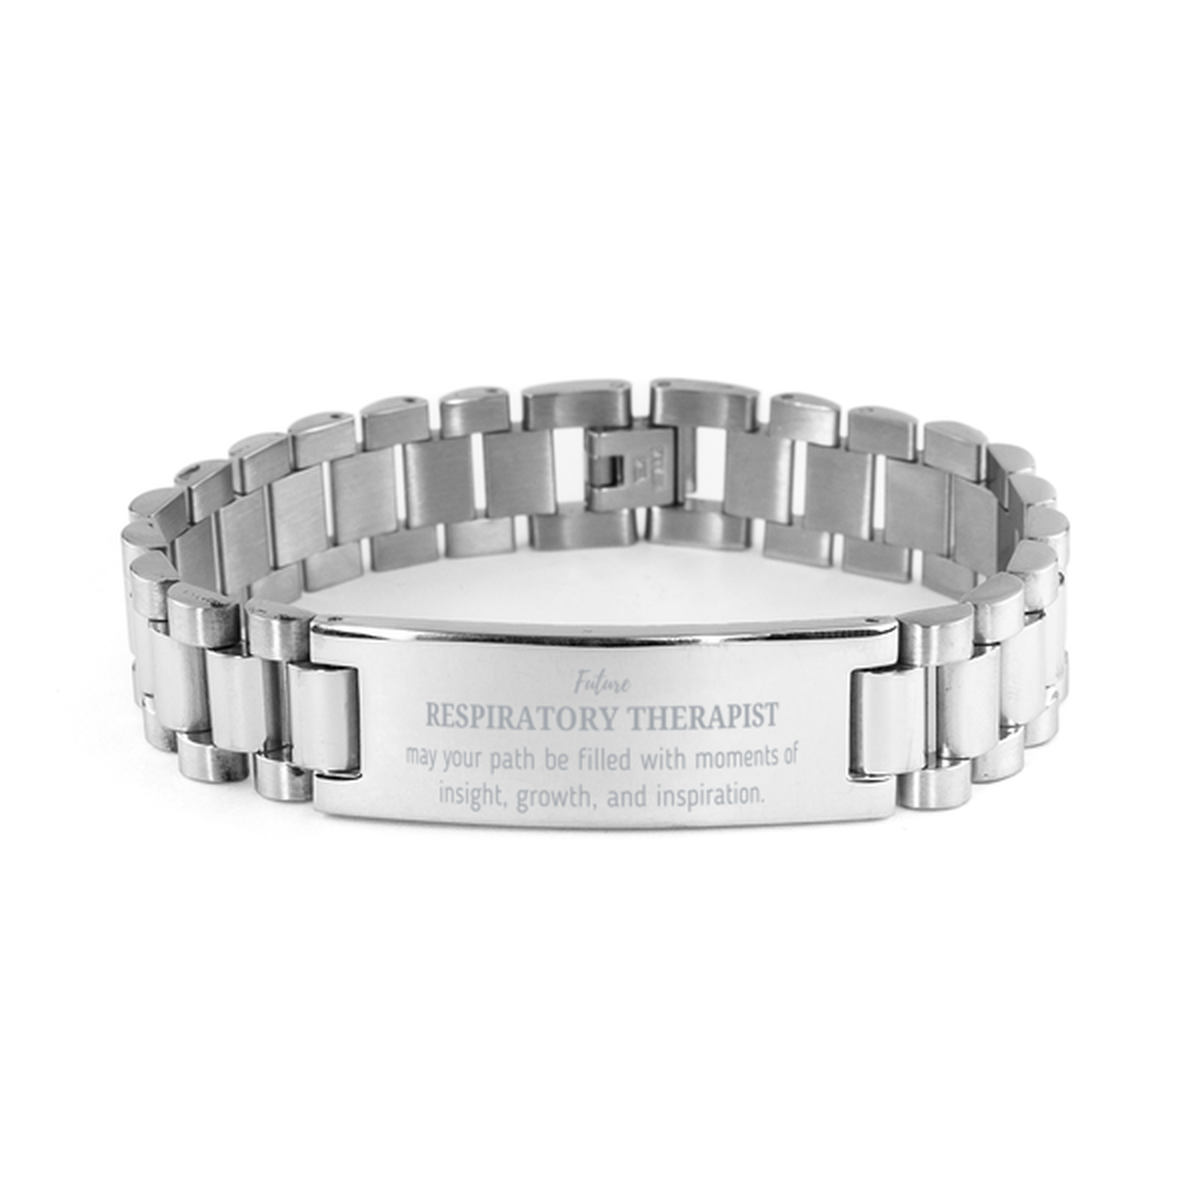 Future Respiratory Therapist Gifts, May your path be filled with moments of insight, Graduation Gifts for New Respiratory Therapist, Christmas Unique Ladder Stainless Steel Bracelet For Men, Women, Friends